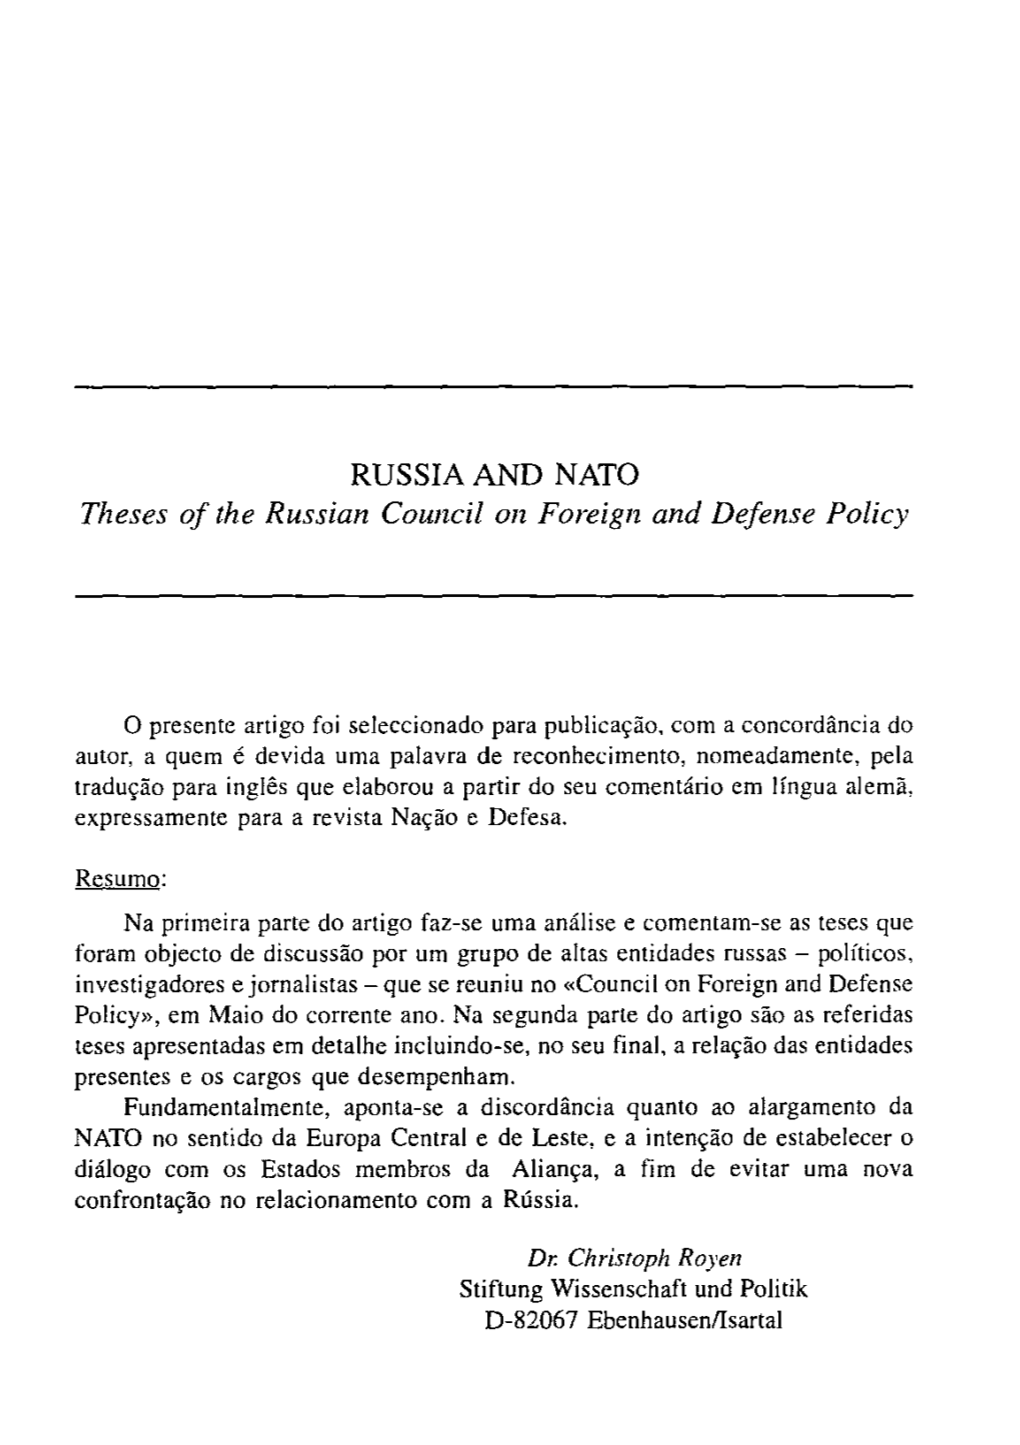 RUSSIA and NATO Theses of Lhe Russian Council Ol! Foreign and Defense Policy